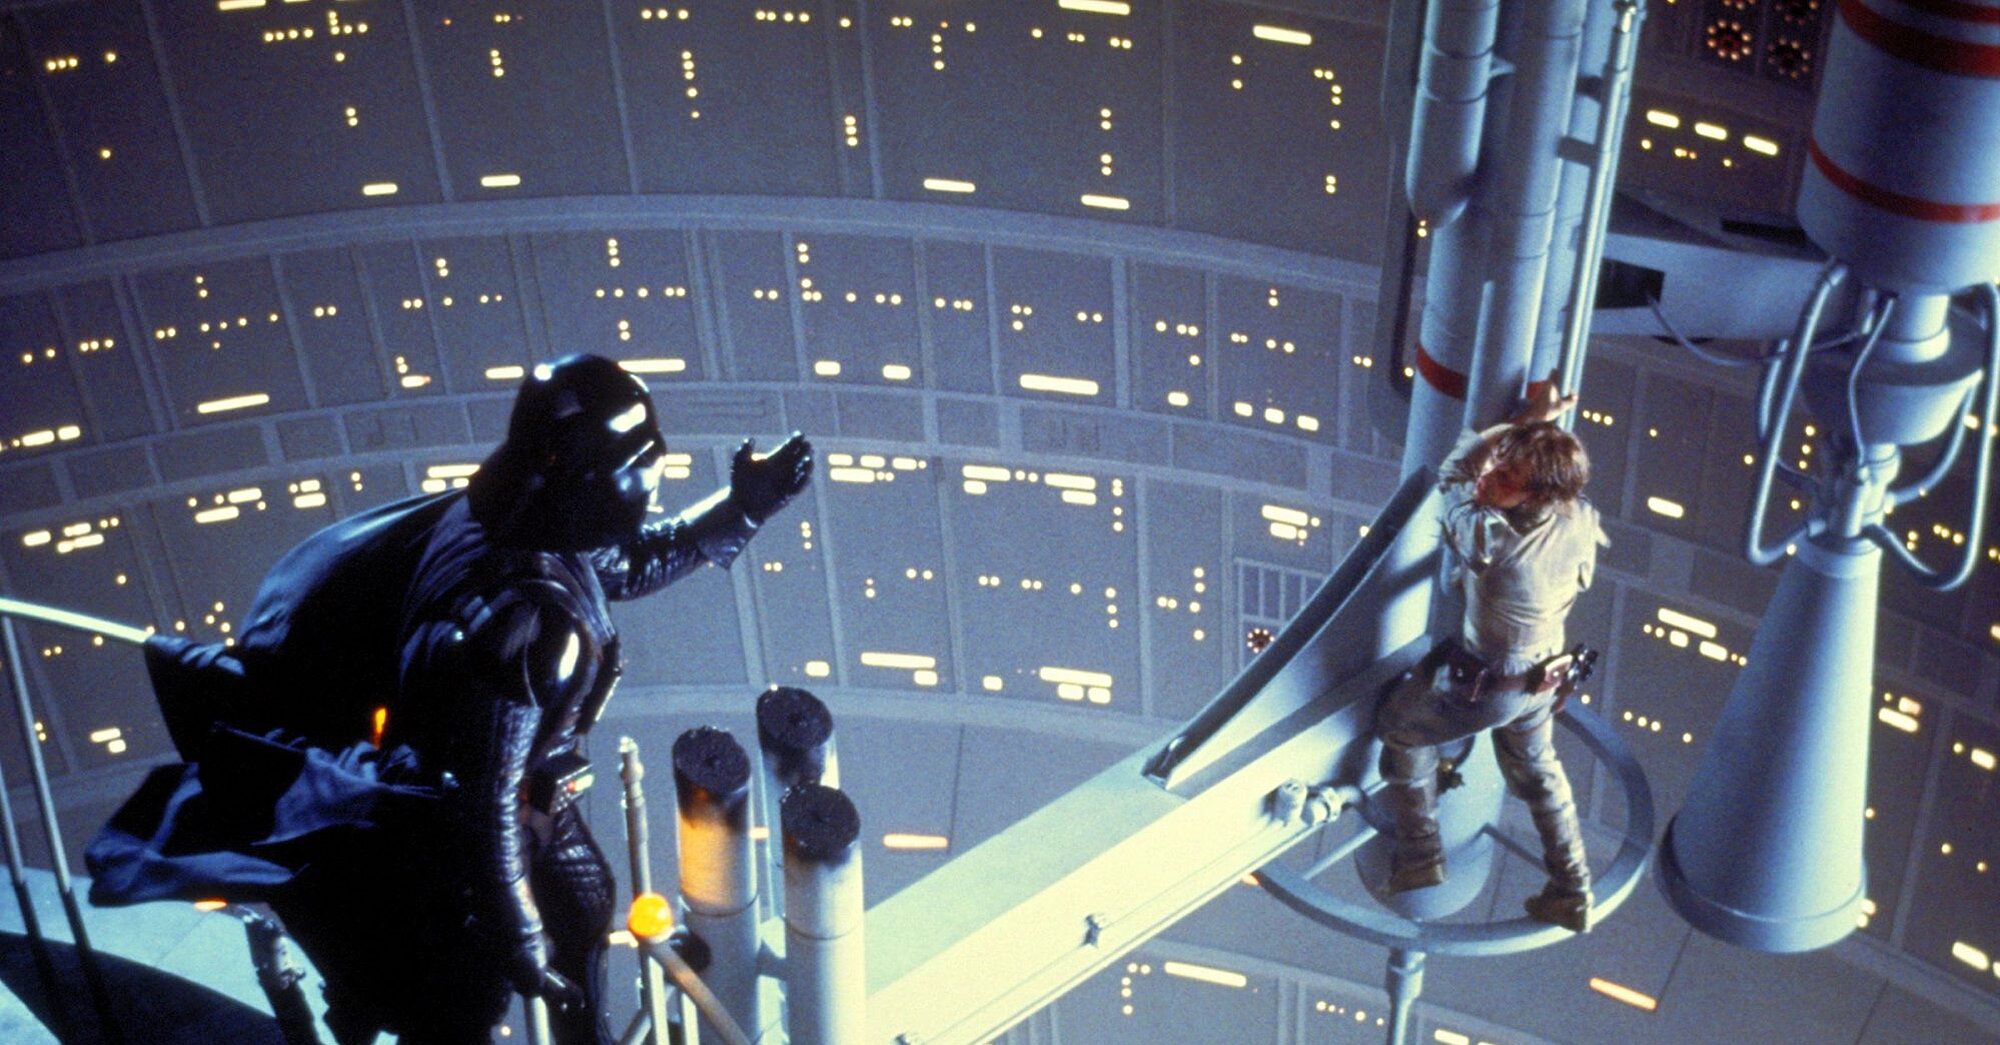 Darth Vader stares down Luke Skywalker, who is hanging precariously on a jutting piece of spaceship architecture.  